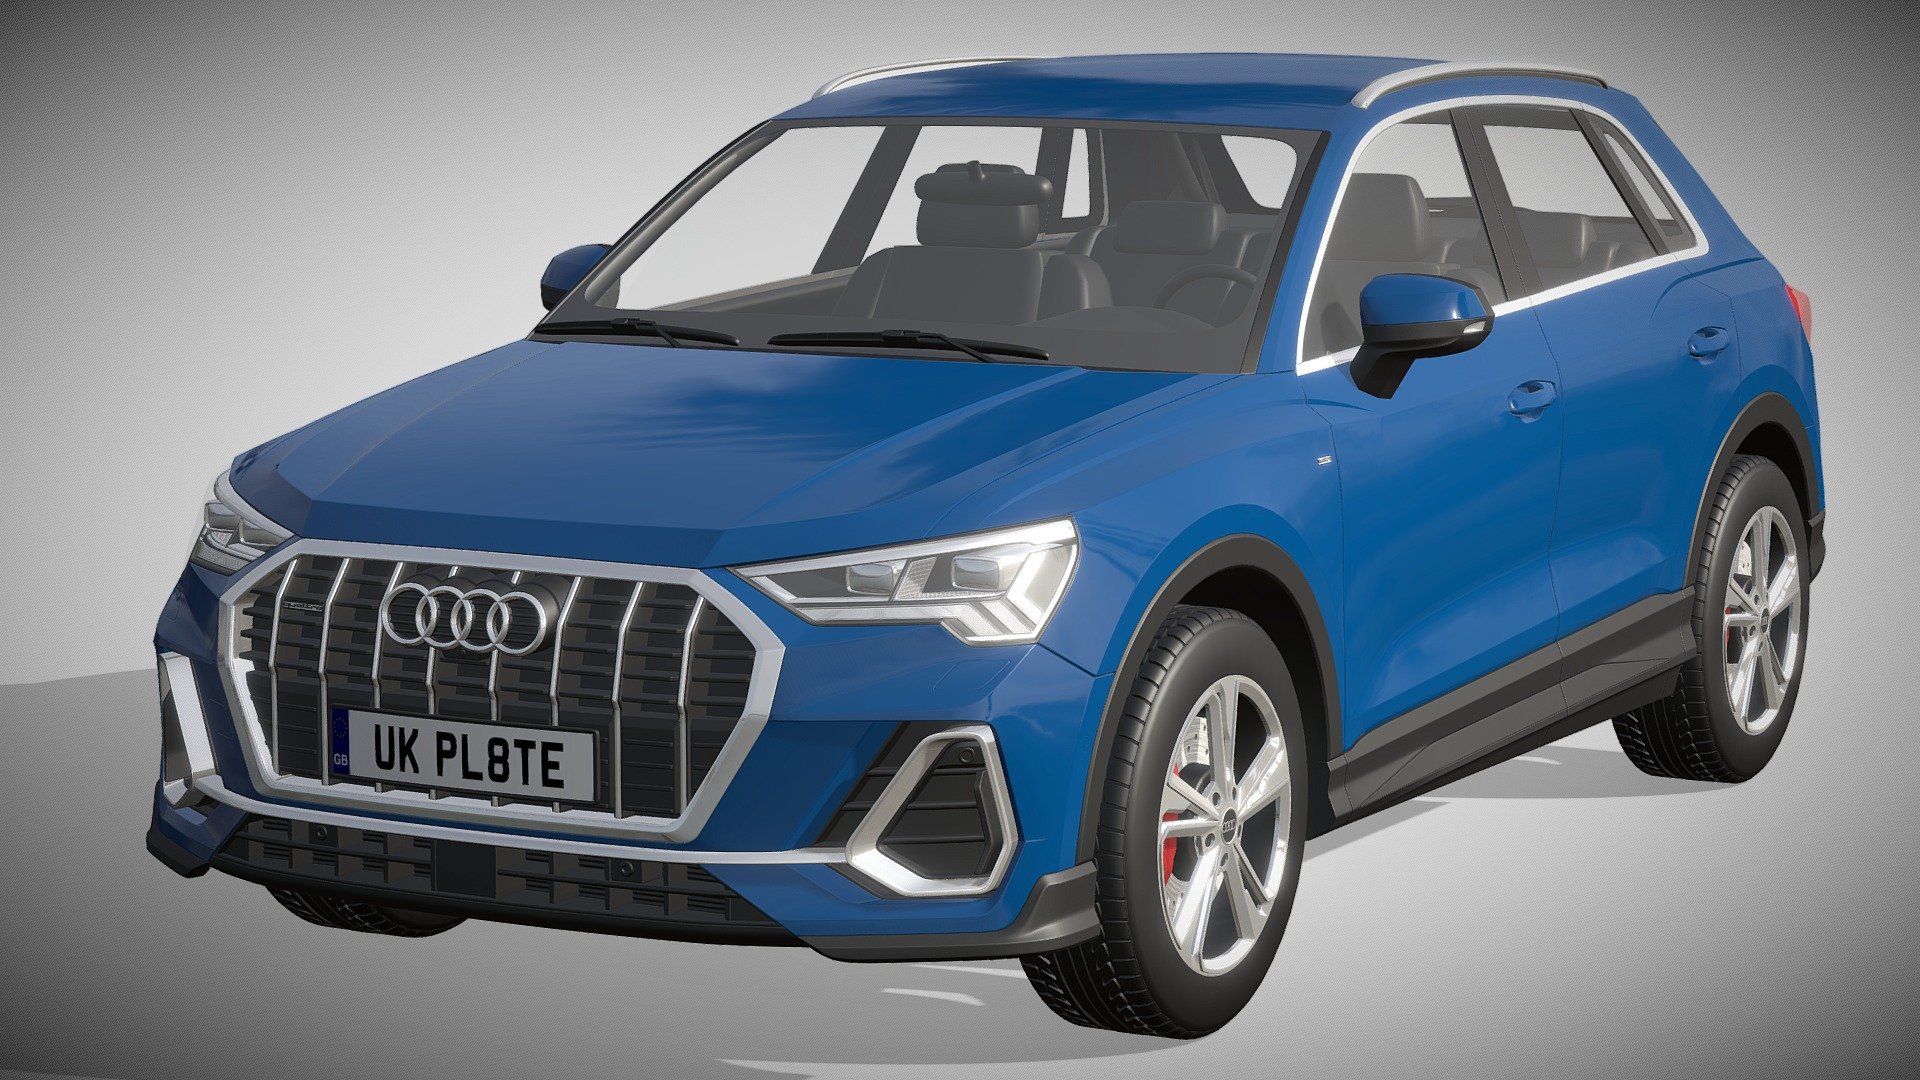 Audi Q3 2020

https://www.audiusa.com/models/audi-q3

Clean geometry Light weight model, yet completely detailed for HI-Res renders. Use for movies, Advertisements or games

Corona render and materials

All textures include in *.rar files

Lighting setup is not included in the file! - Audi Q3 2020 - Buy Royalty Free 3D model by zifir3d 3d model